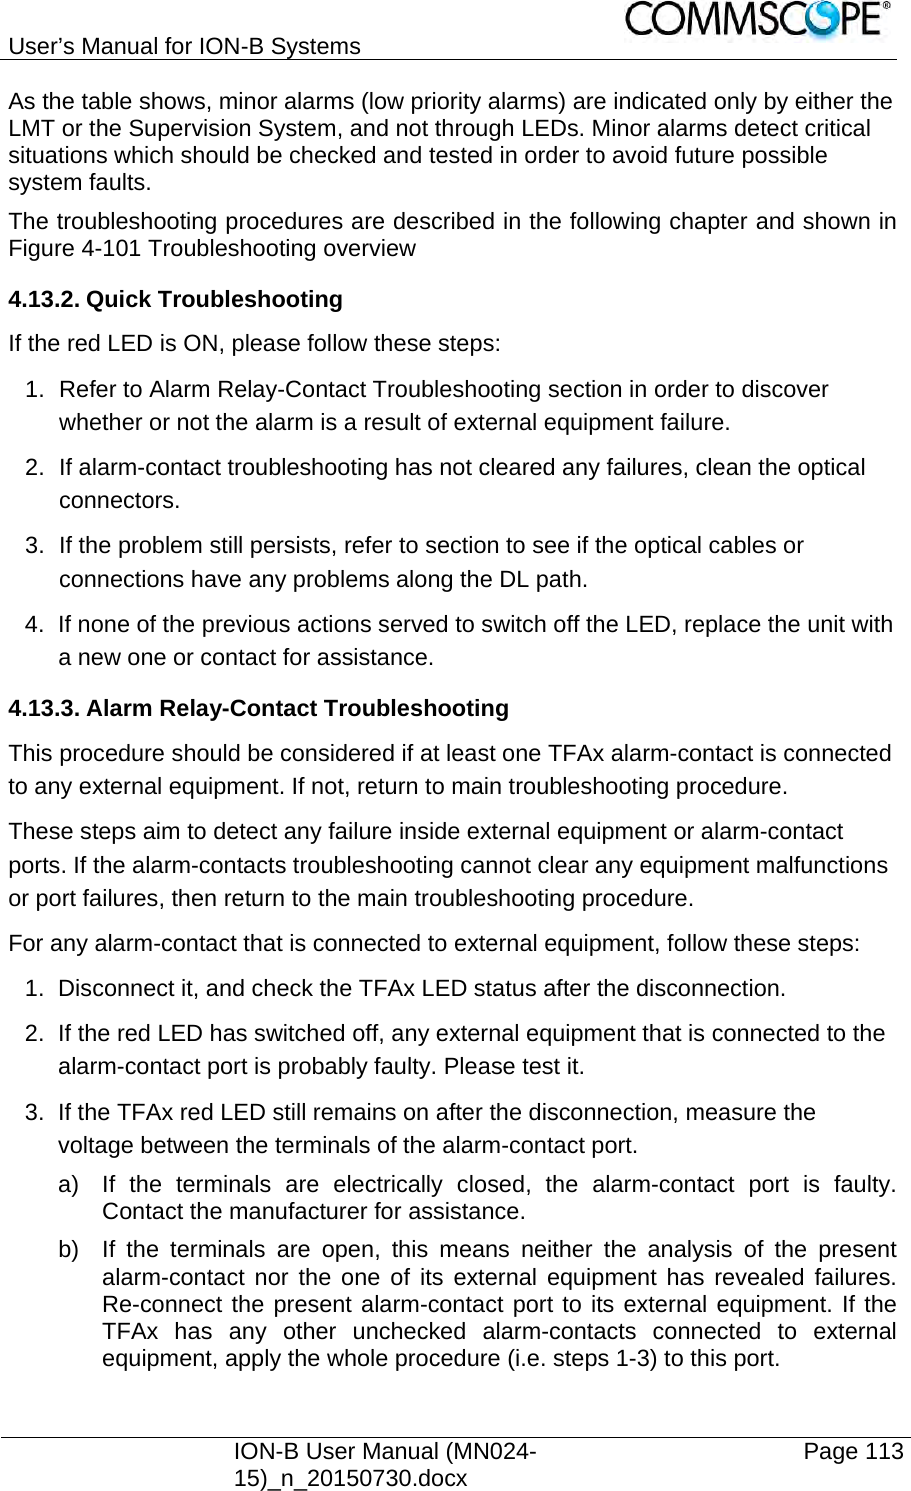 User’s Manual for ION-B Systems    ION-B User Manual (MN024-15)_n_20150730.docx  Page 113 As the table shows, minor alarms (low priority alarms) are indicated only by either the LMT or the Supervision System, and not through LEDs. Minor alarms detect critical situations which should be checked and tested in order to avoid future possible system faults. The troubleshooting procedures are described in the following chapter and shown in Figure 4-101 Troubleshooting overview 4.13.2. Quick Troubleshooting If the red LED is ON, please follow these steps: 1.  Refer to Alarm Relay-Contact Troubleshooting section in order to discover whether or not the alarm is a result of external equipment failure. 2.  If alarm-contact troubleshooting has not cleared any failures, clean the optical connectors. 3.  If the problem still persists, refer to section to see if the optical cables or connections have any problems along the DL path. 4.  If none of the previous actions served to switch off the LED, replace the unit with a new one or contact for assistance. 4.13.3. Alarm Relay-Contact Troubleshooting This procedure should be considered if at least one TFAx alarm-contact is connected to any external equipment. If not, return to main troubleshooting procedure. These steps aim to detect any failure inside external equipment or alarm-contact ports. If the alarm-contacts troubleshooting cannot clear any equipment malfunctions or port failures, then return to the main troubleshooting procedure. For any alarm-contact that is connected to external equipment, follow these steps:  1.  Disconnect it, and check the TFAx LED status after the disconnection. 2.  If the red LED has switched off, any external equipment that is connected to the alarm-contact port is probably faulty. Please test it. 3.  If the TFAx red LED still remains on after the disconnection, measure the voltage between the terminals of the alarm-contact port. a)  If the terminals are electrically closed, the alarm-contact port is faulty. Contact the manufacturer for assistance. b)  If the terminals are open, this means neither the analysis of the present alarm-contact nor the one of its external equipment has revealed failures. Re-connect the present alarm-contact port to its external equipment. If the TFAx has any other unchecked alarm-contacts connected to external equipment, apply the whole procedure (i.e. steps 1-3) to this port. 